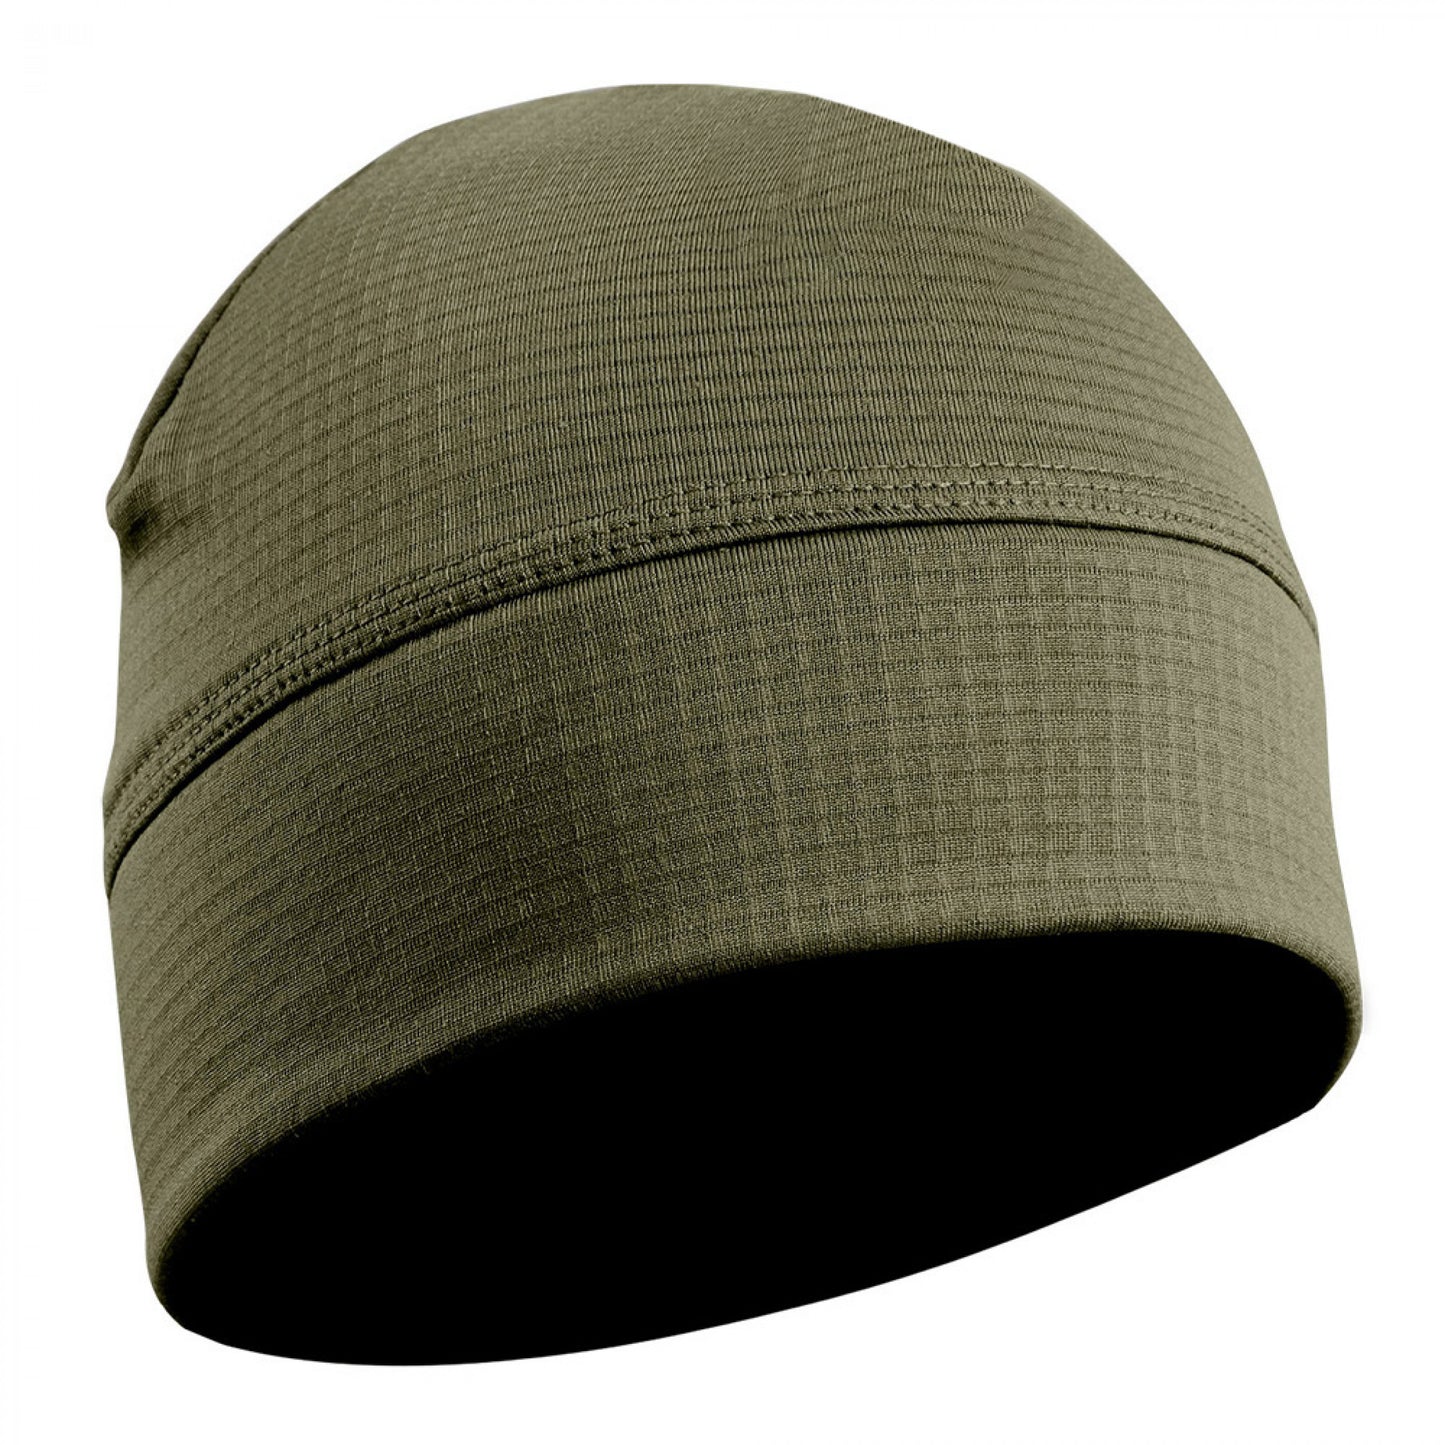 Bonnet Thermo Performer -10°C > -20°C vert olive